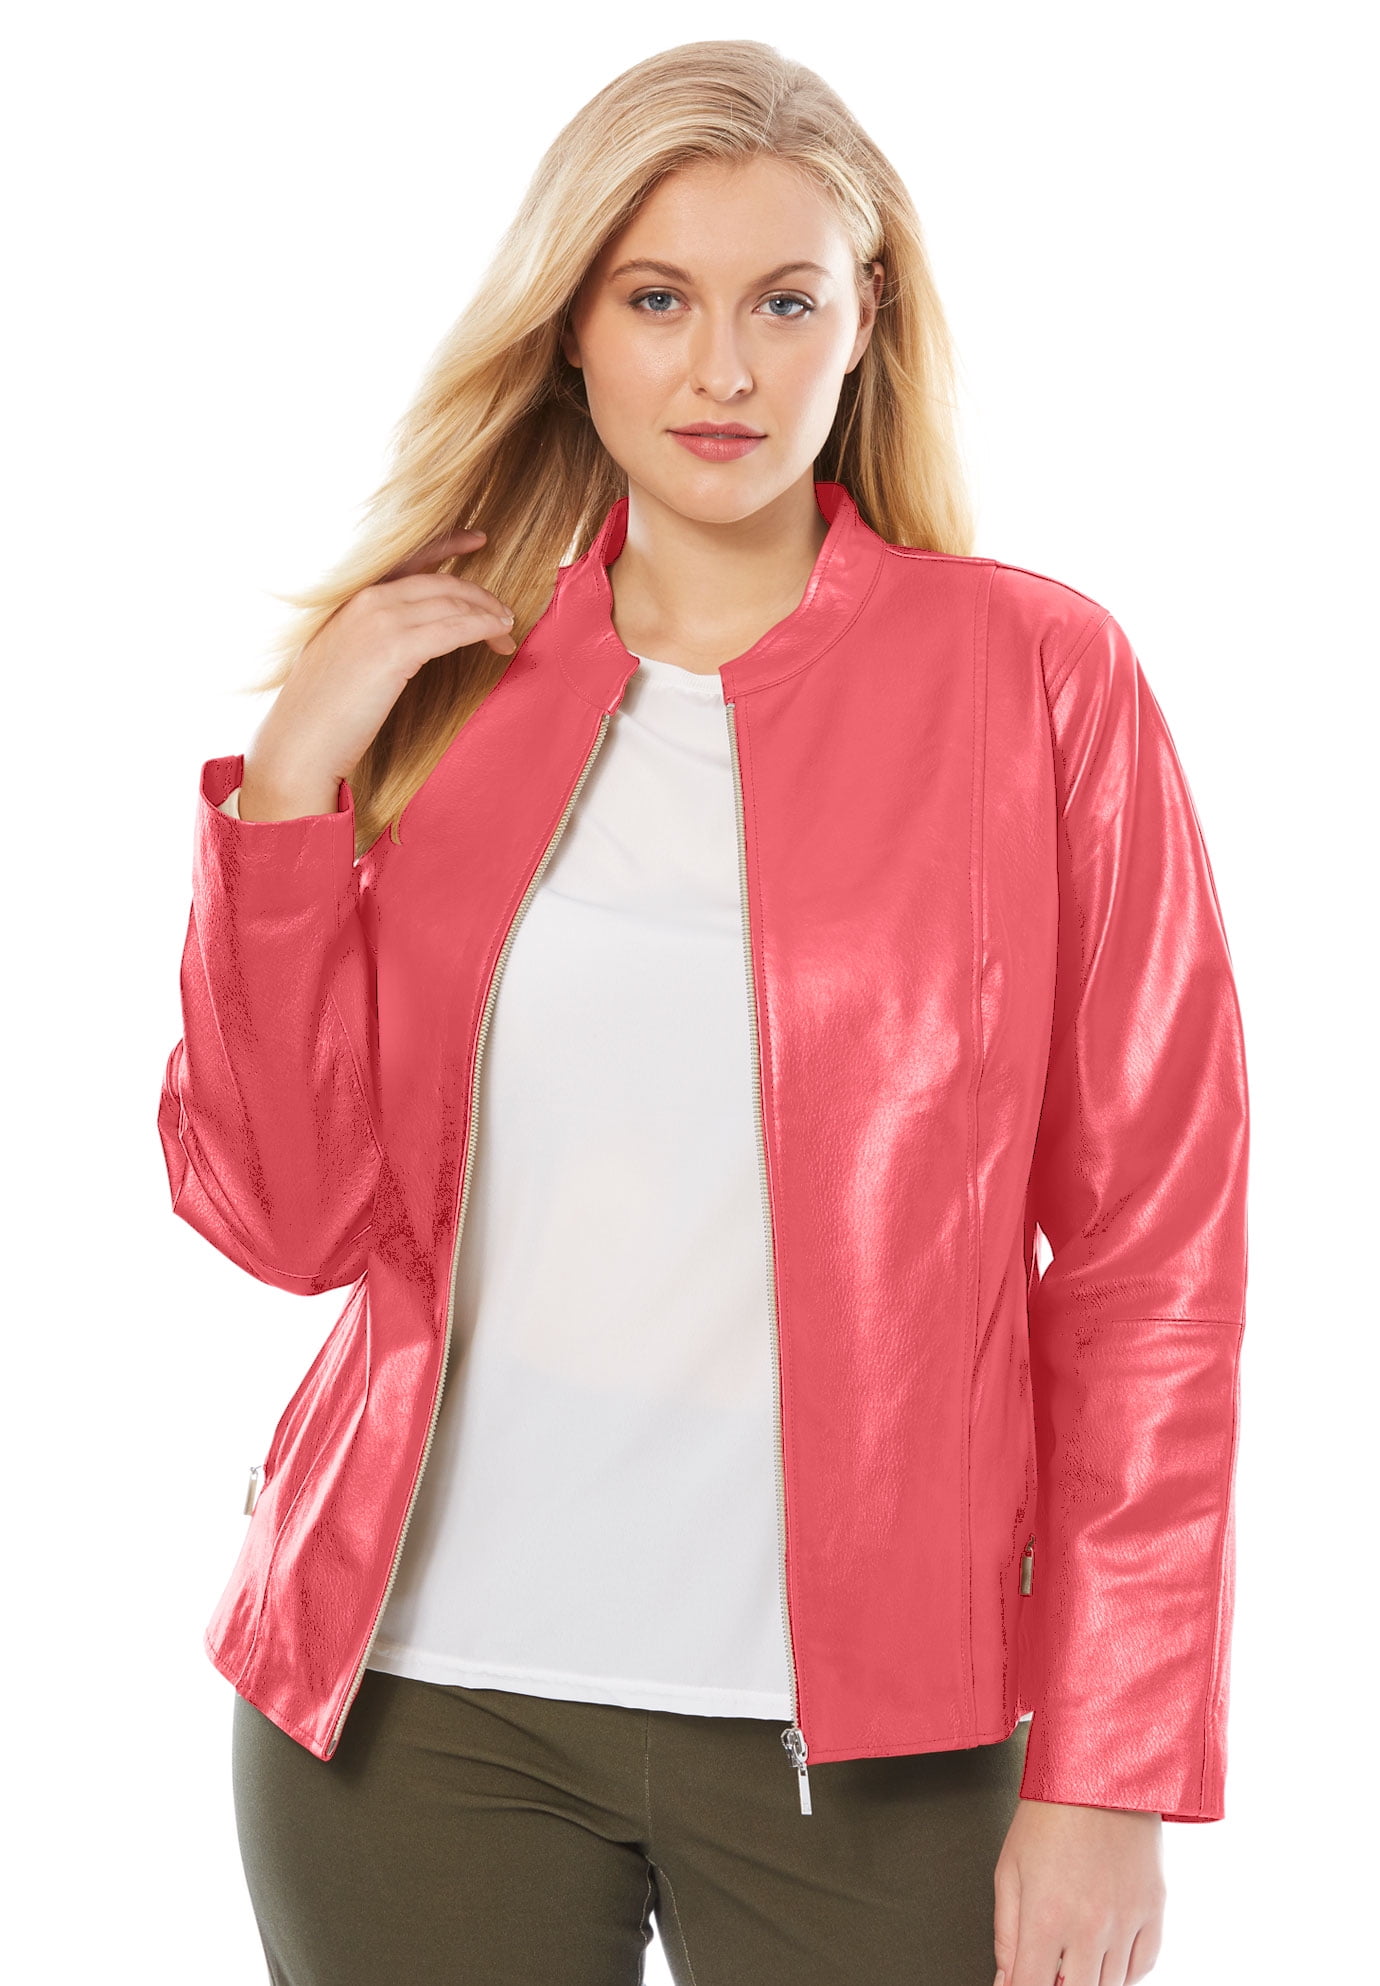 Jessica London Womens Plus Size Zip Front Leather Jacket